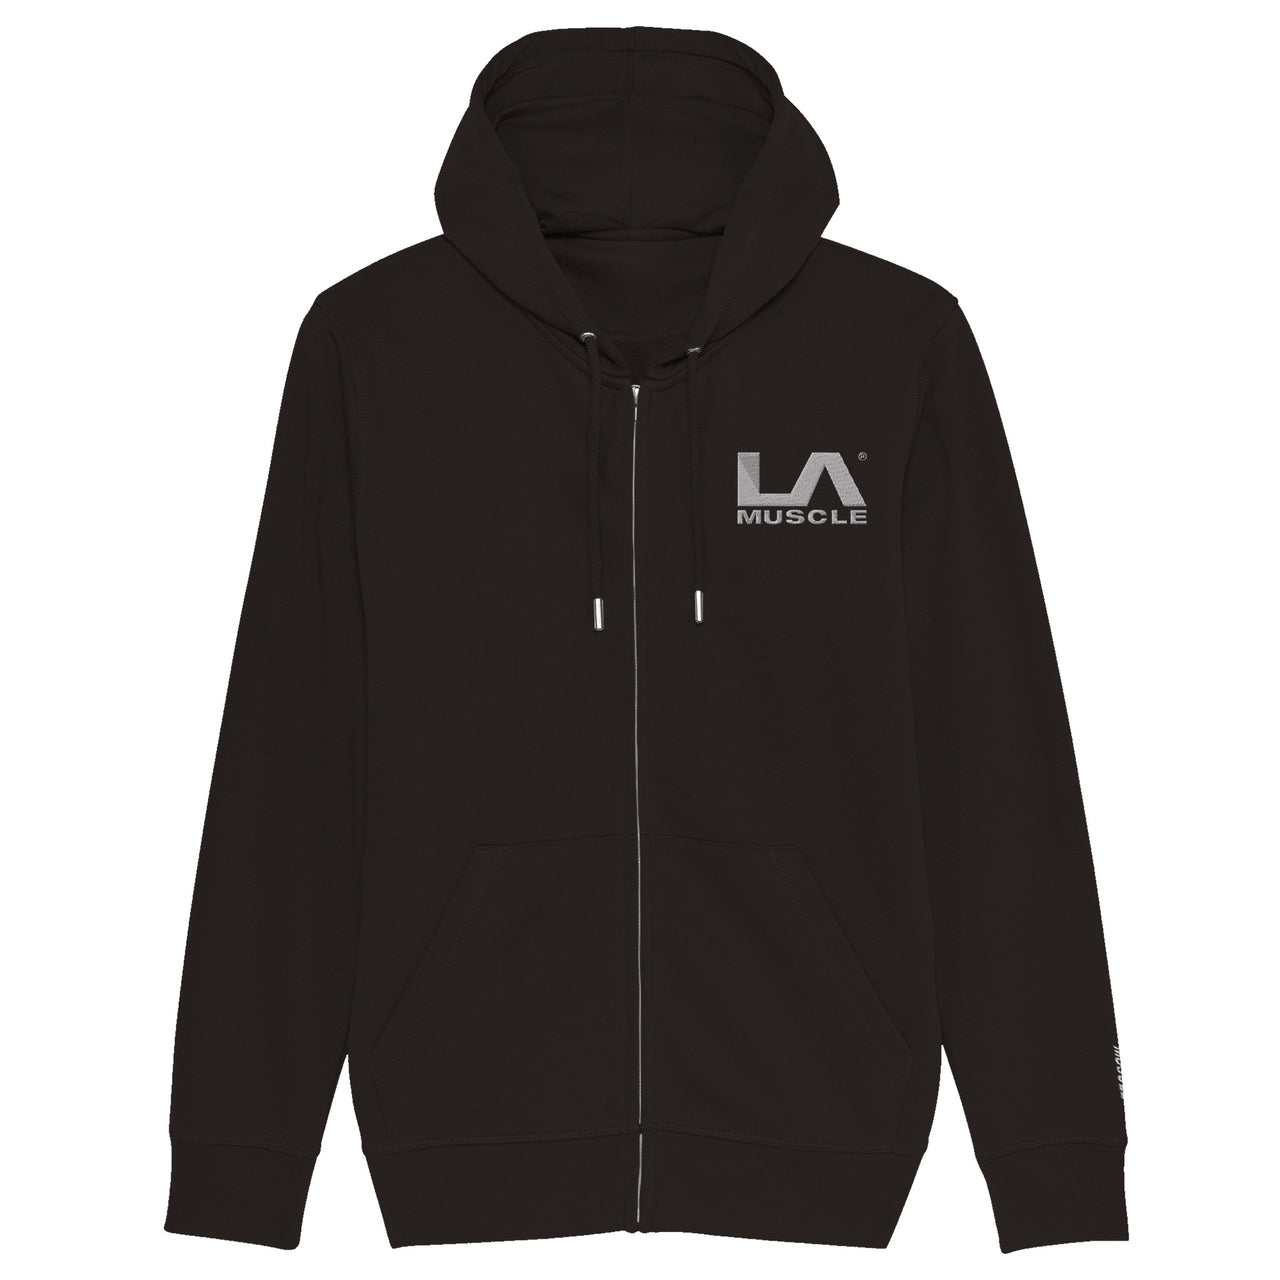 PREMIUM LA MUSCLE EMBROIDERED White Logo Organic Unisex Zip Hoodie for life